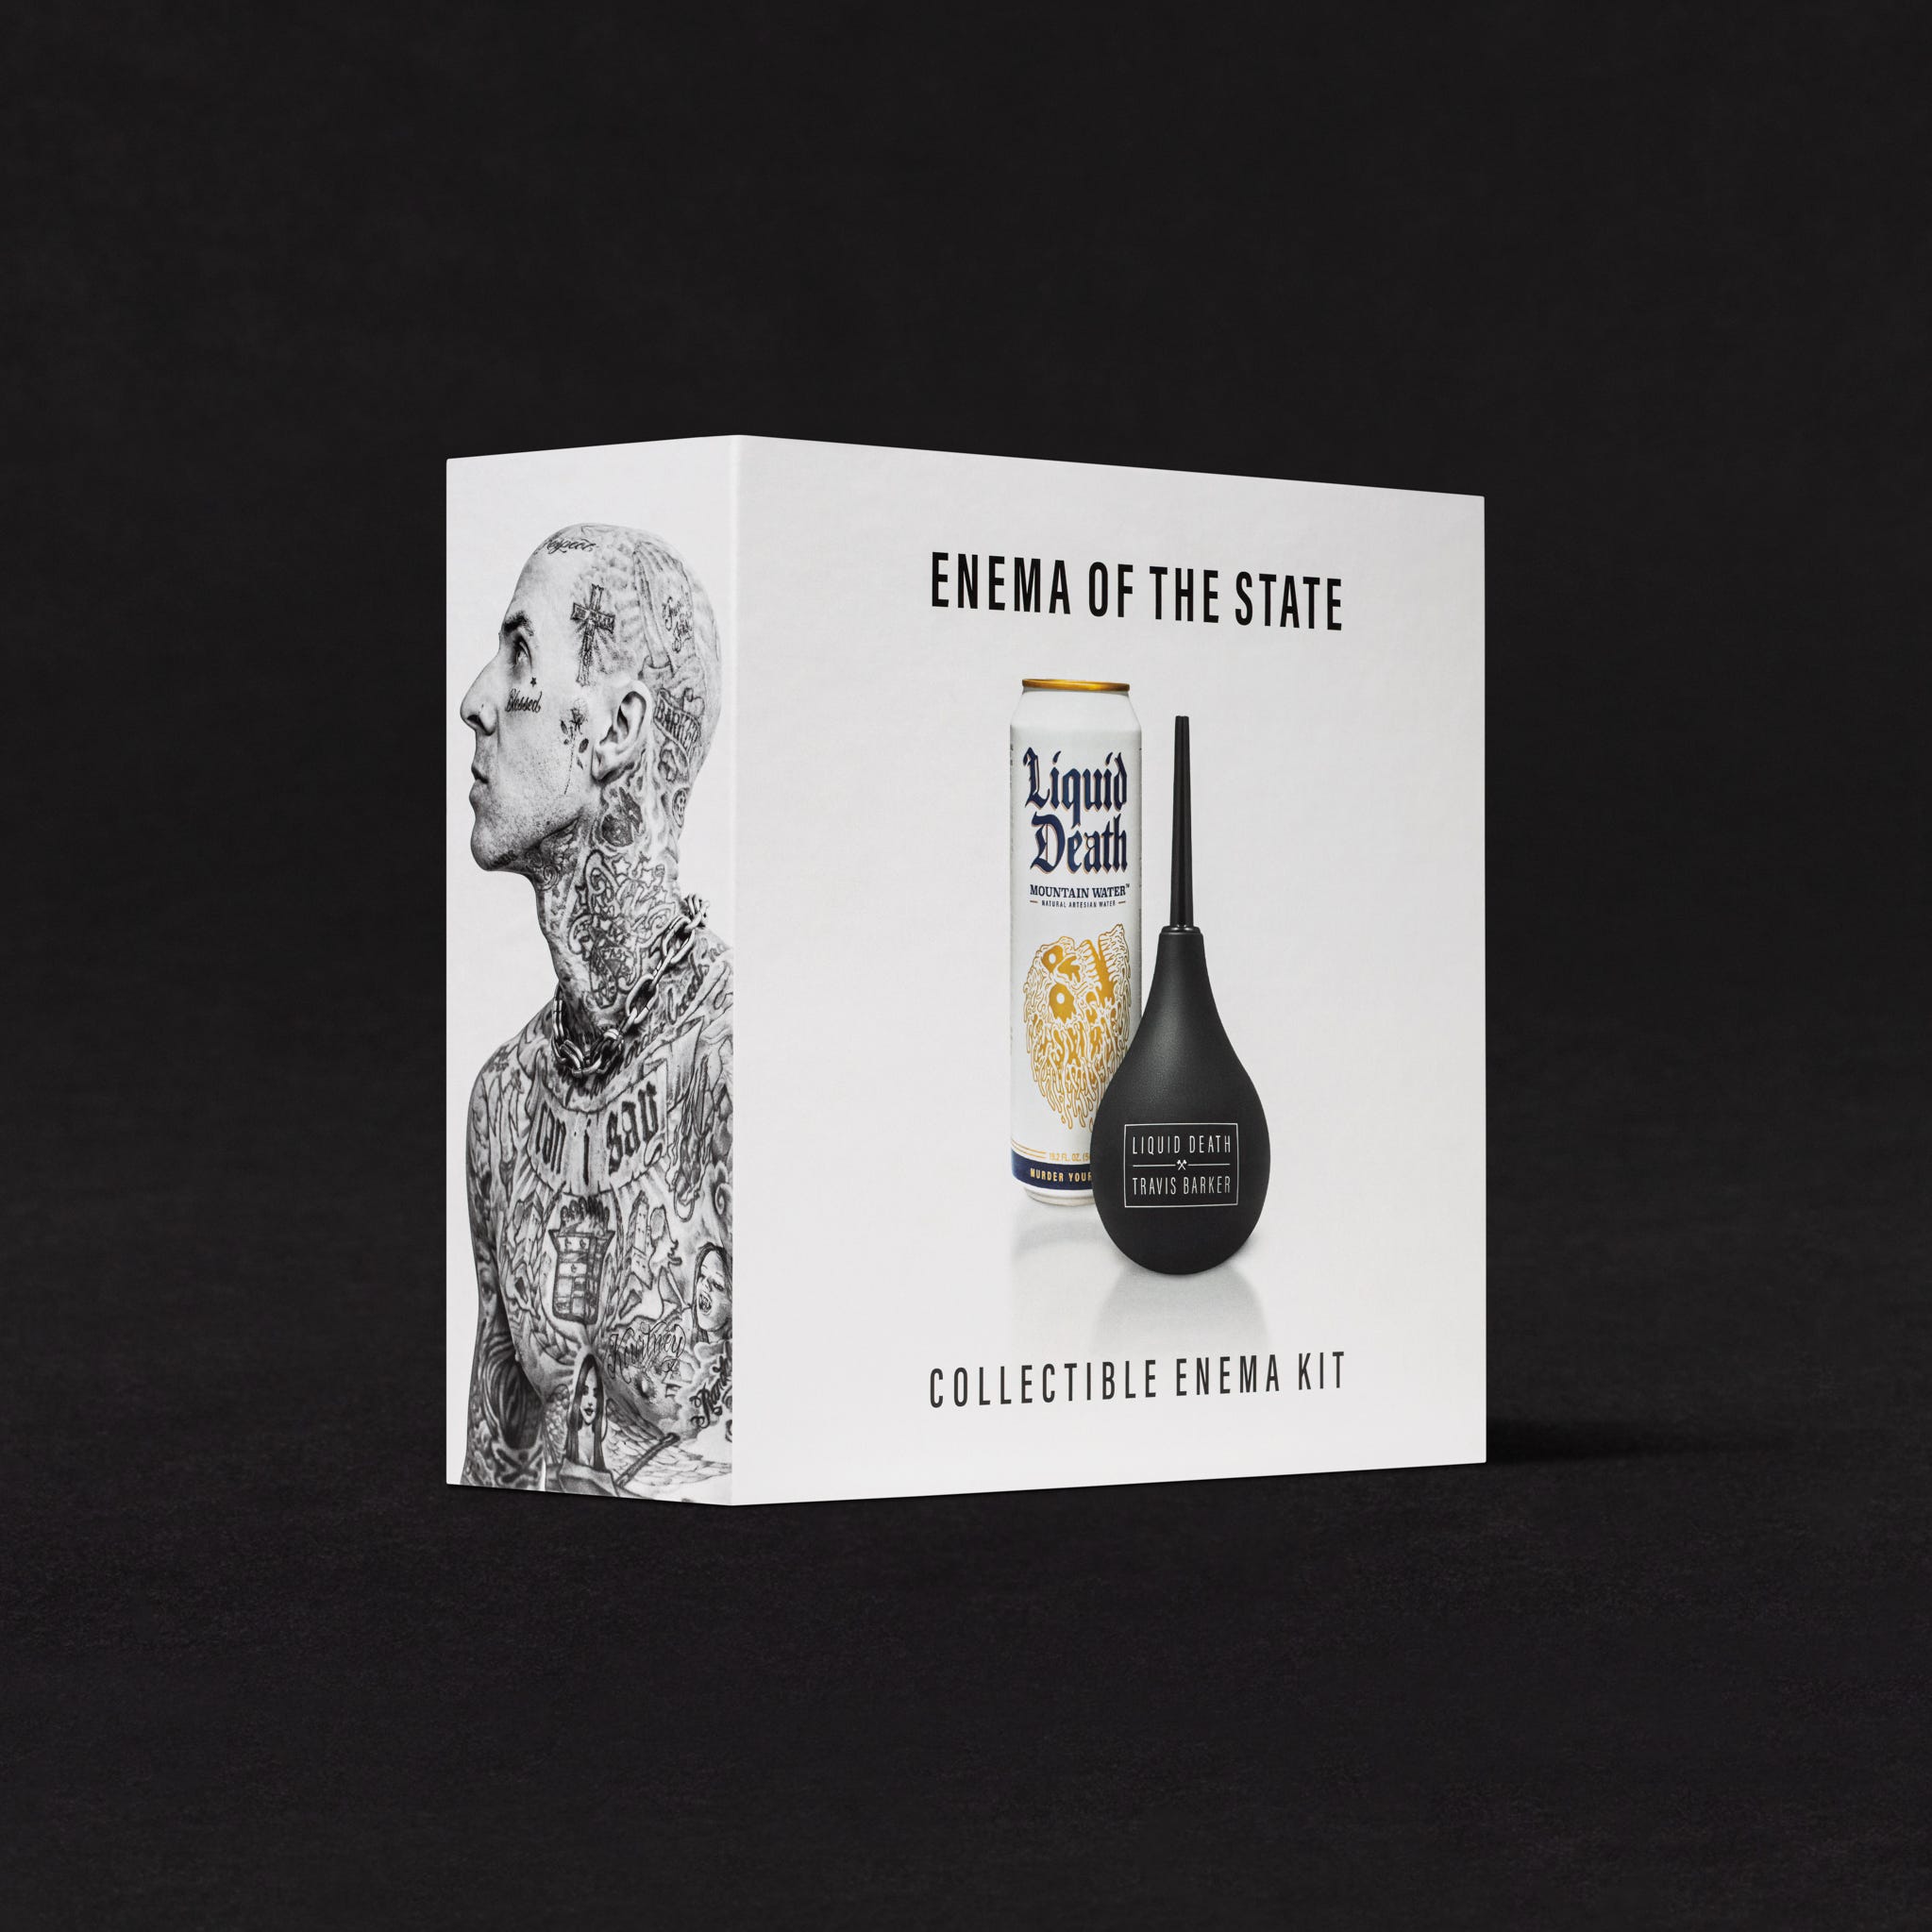 This limited edition Liquid Death Enema of The State Collectible Enema Kit ($182)  comes with a can of Liquid Death water, hand-signed by Barker, and a replica enema bulb. It goes on sale today at liquiddeath.com; only a few hundred are available, the company says.